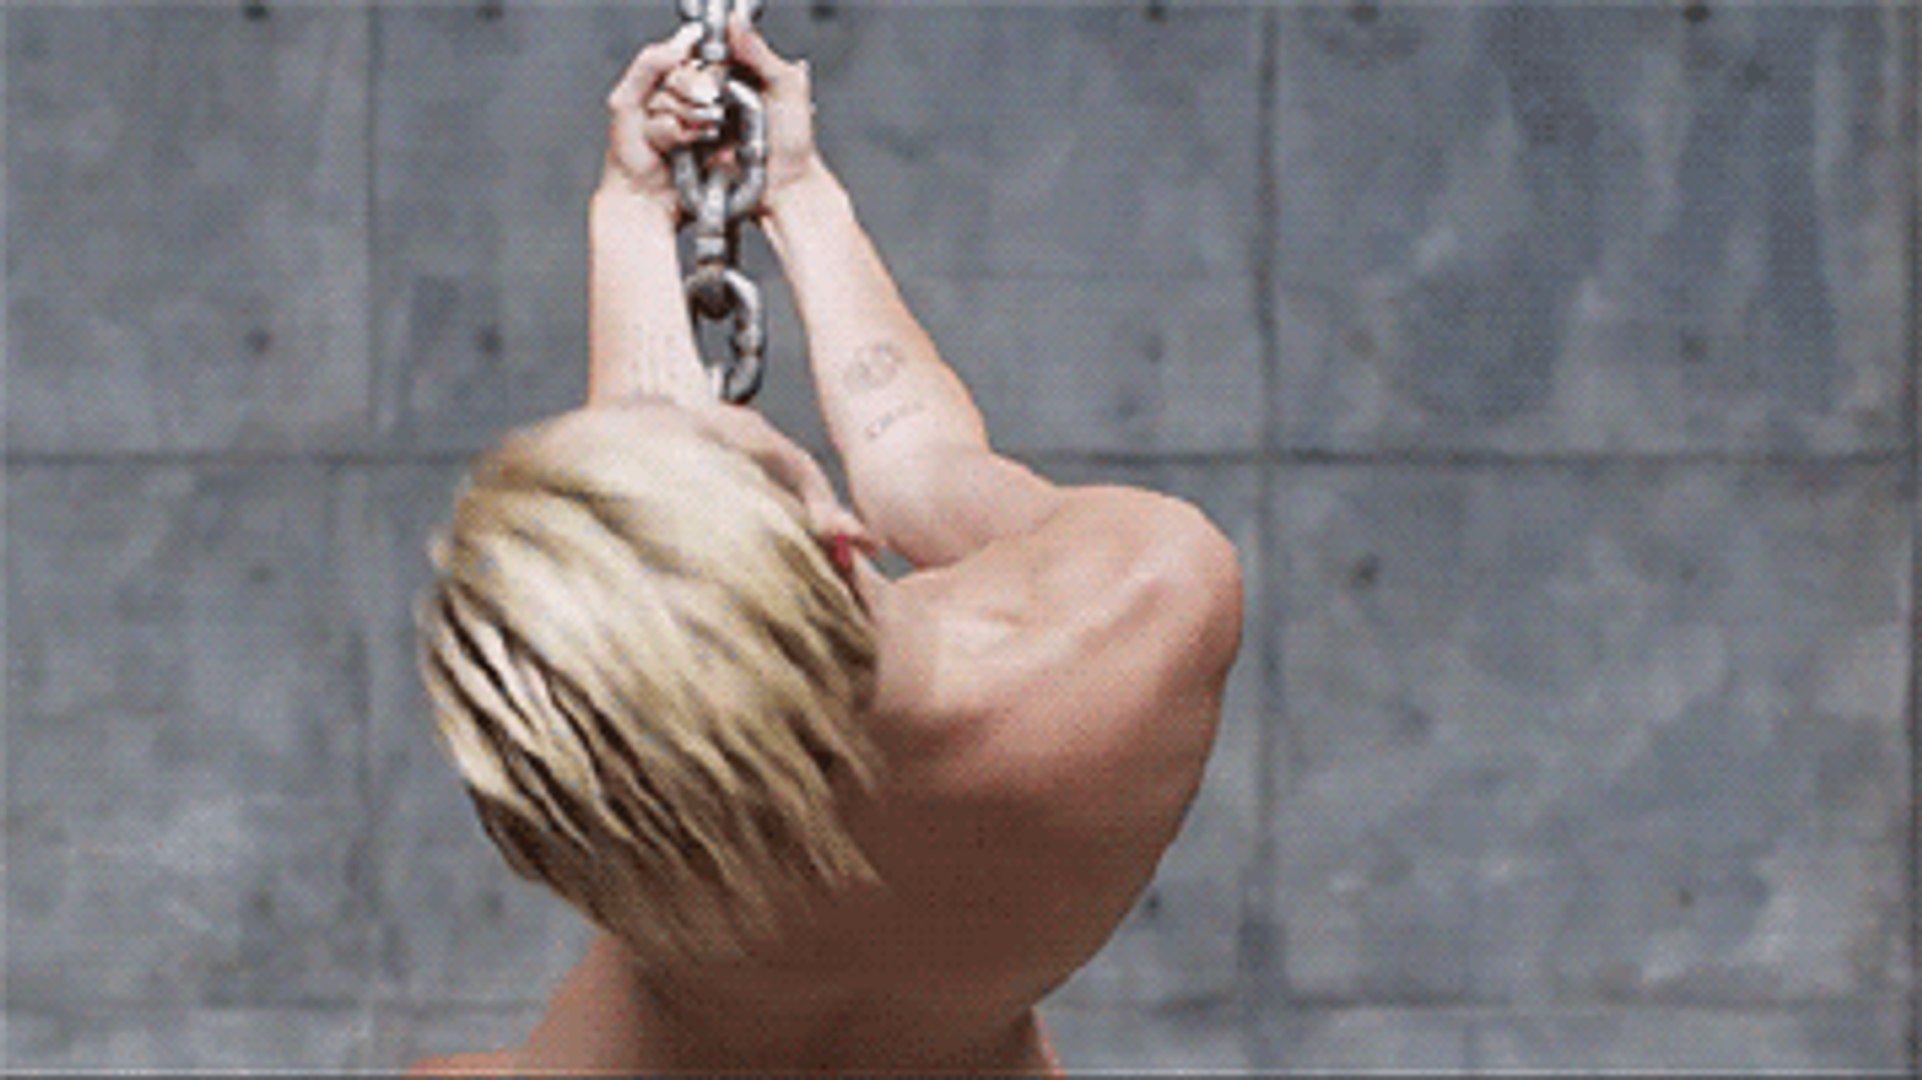 Miley Cyrus Wrecking Ball Official Music Video 2016 - video Dailymotion